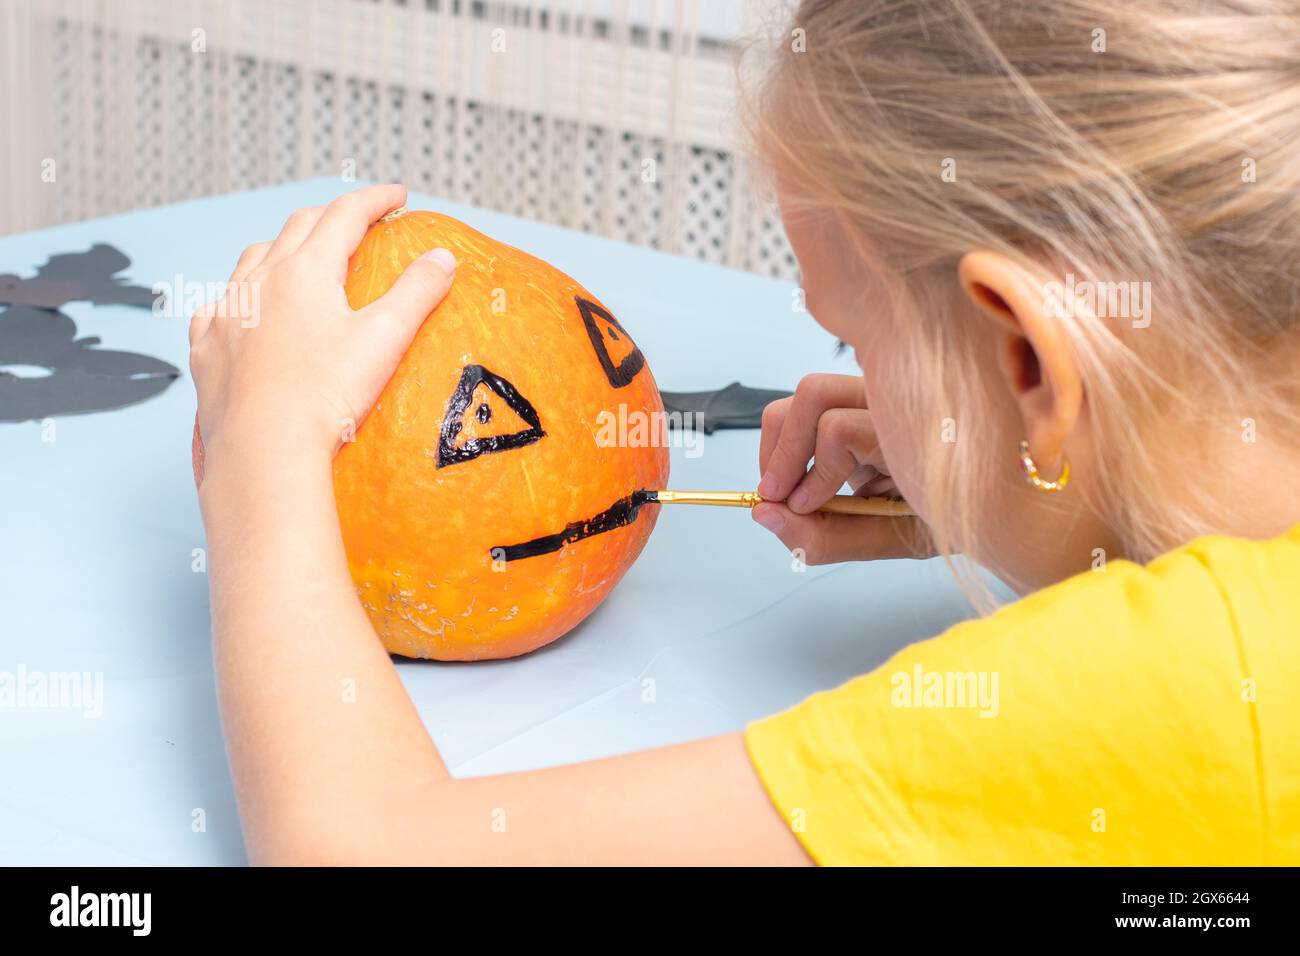 Cute young girl painting scary face on orange pumpkin with brush for home decoration during Halloween holiday, back view, close-up. Halloween party an Stock Photo